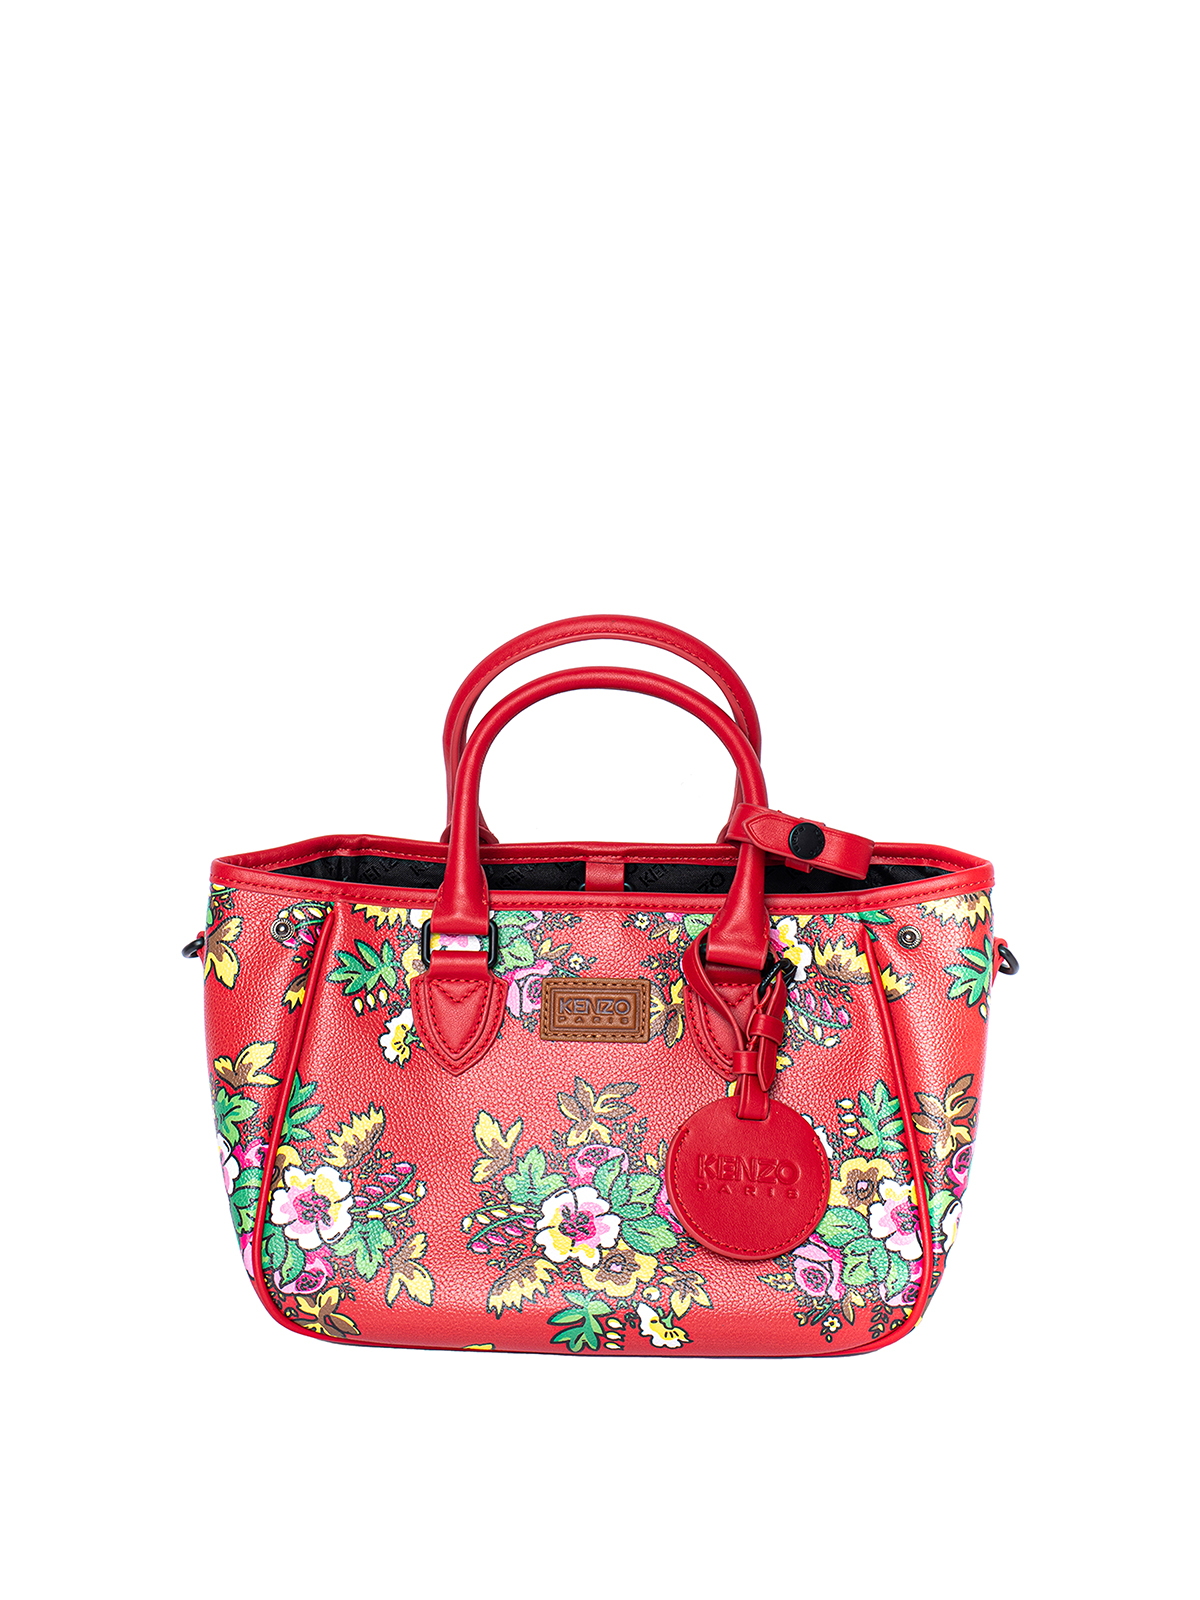 Kenzo Pop Floral Small Tote Bag In Red